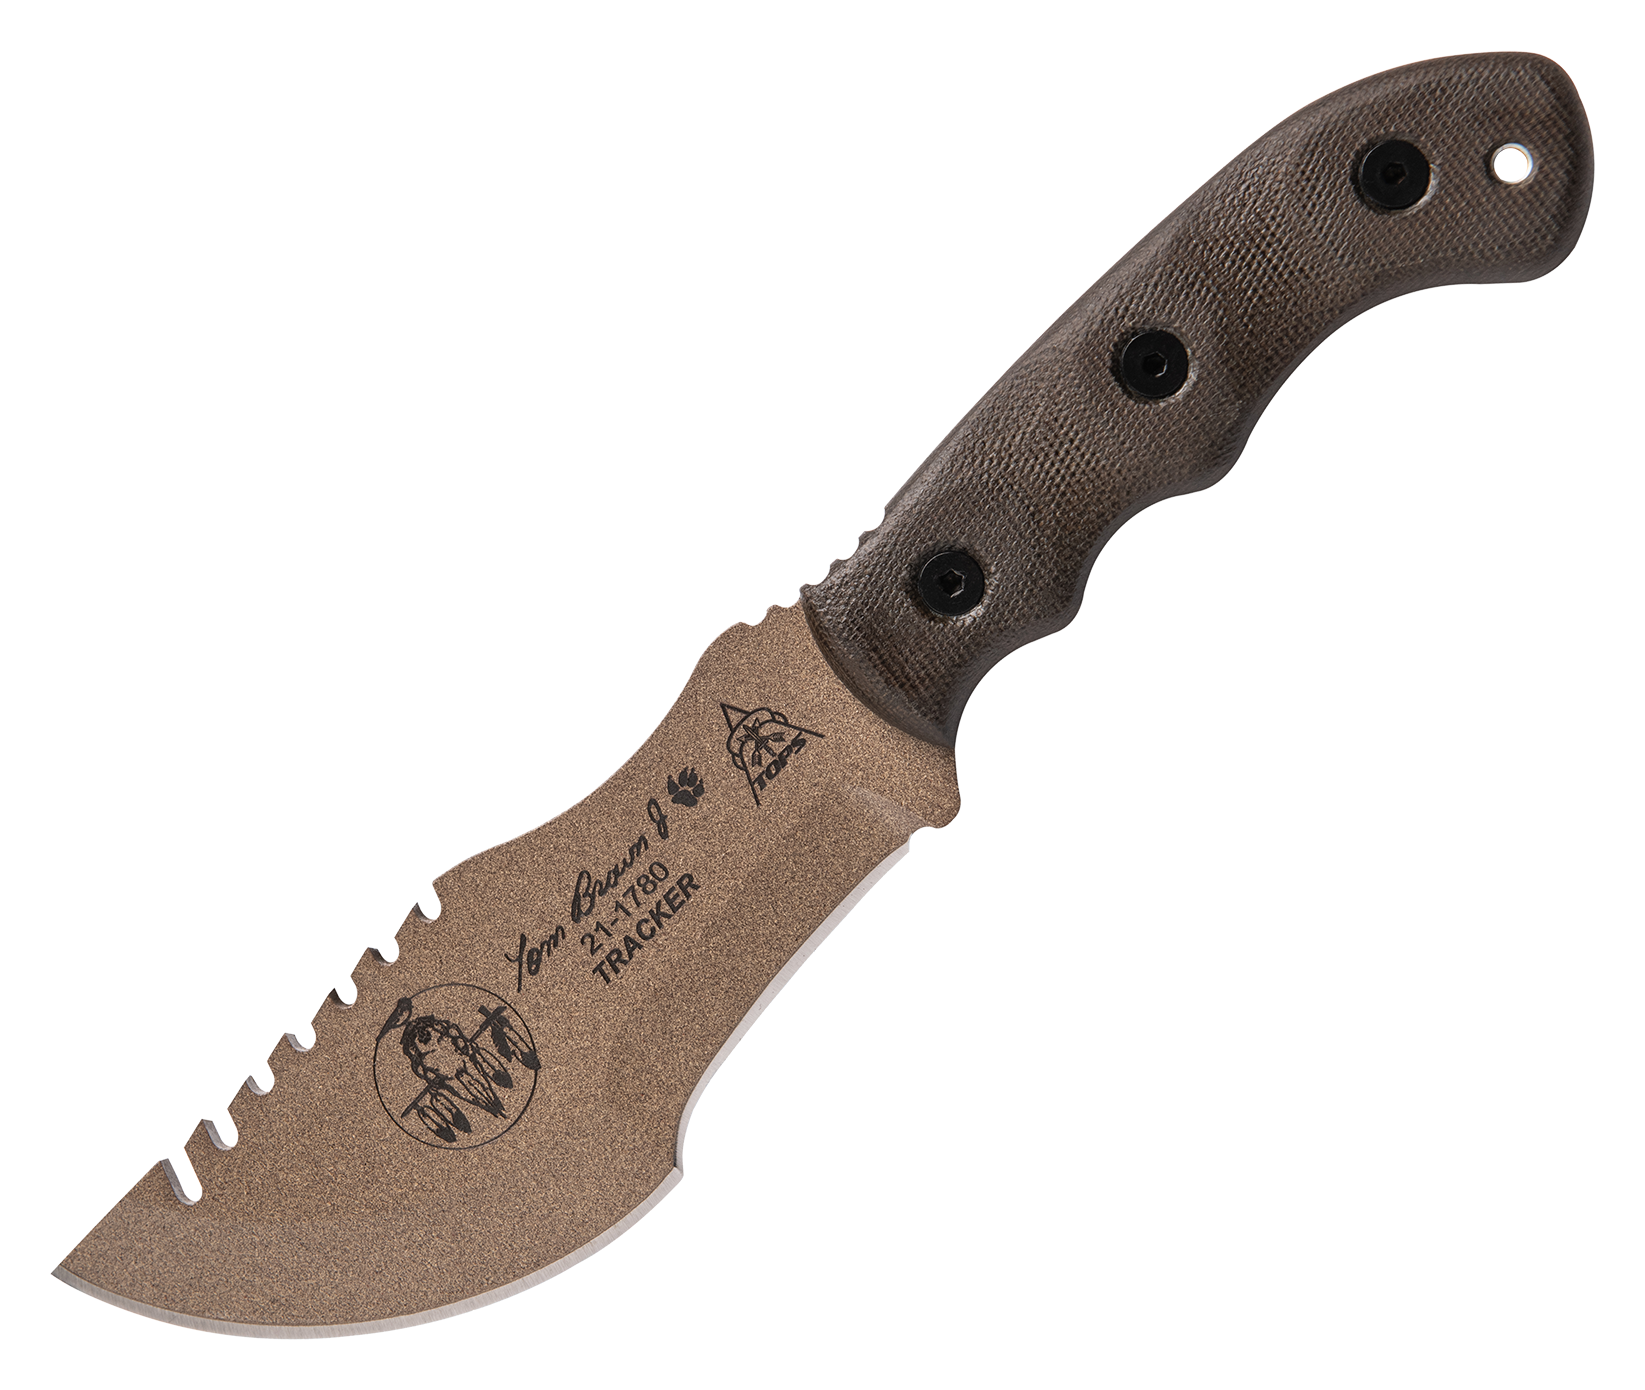 TOPS Knives Tom Brown Tracker 2 Fixed-Blade Knife - Coyote Tan